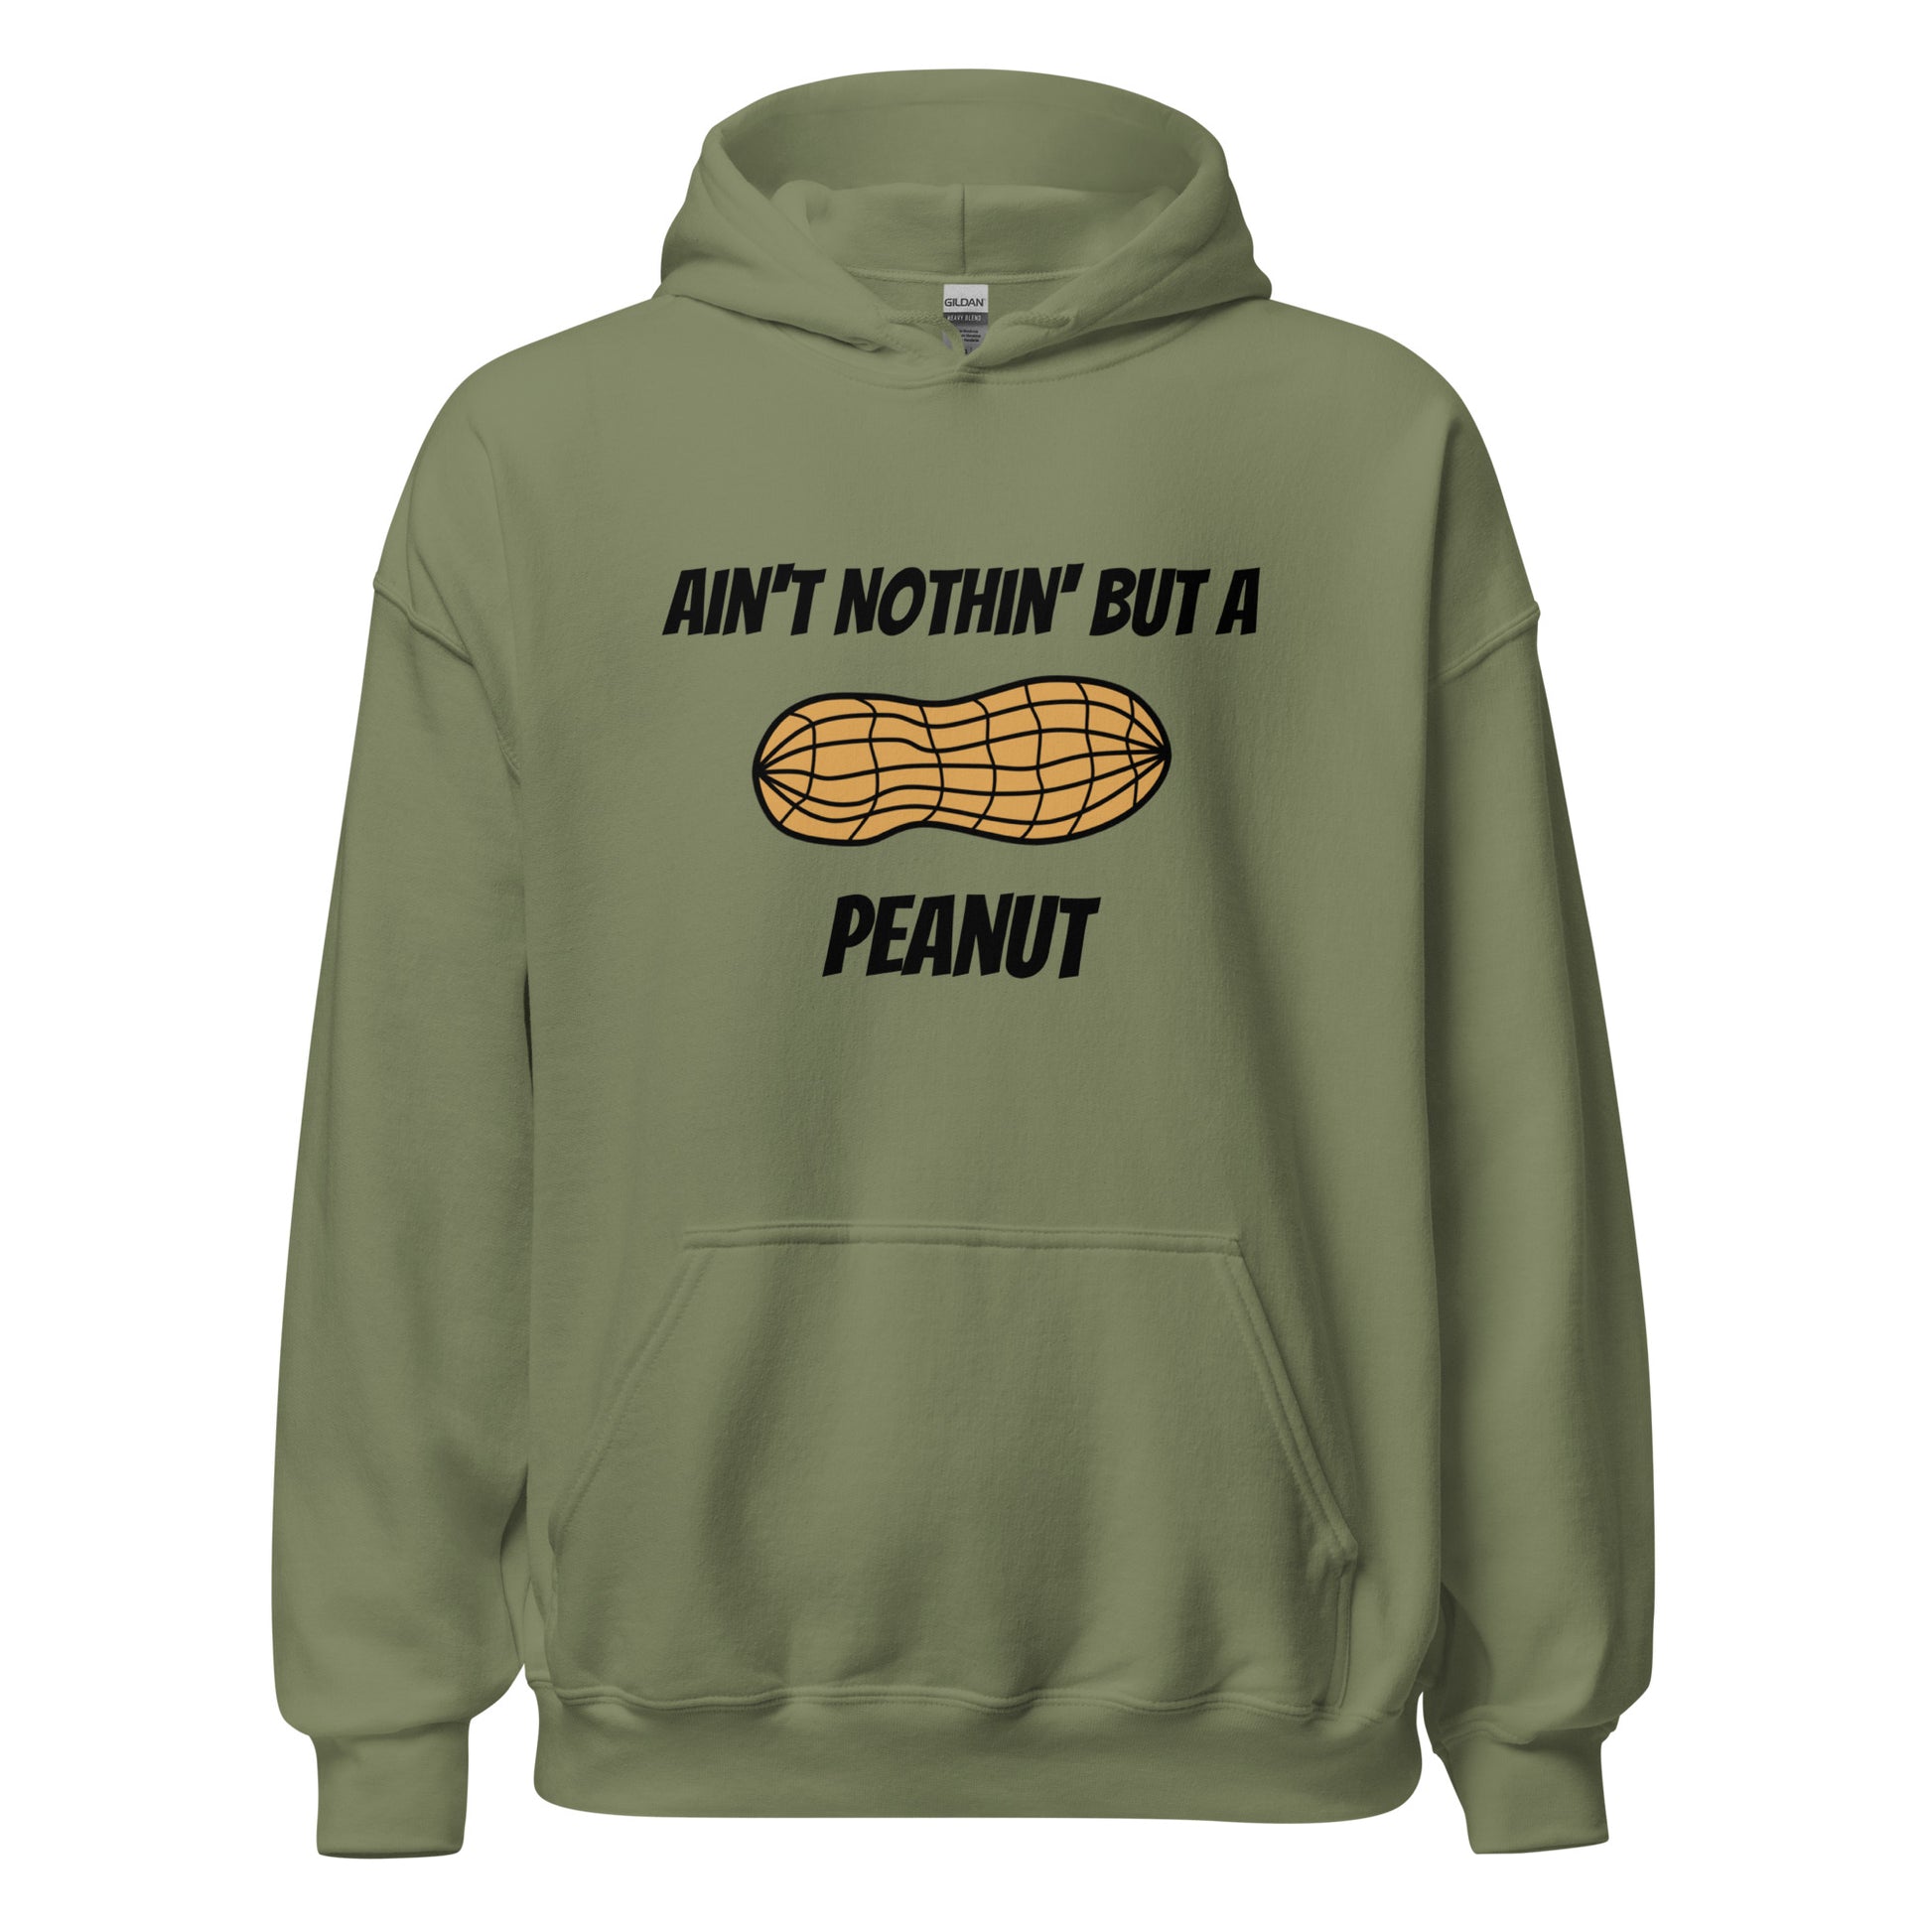 Ain't Nothin' but a Peanut Hoodie in Military Green